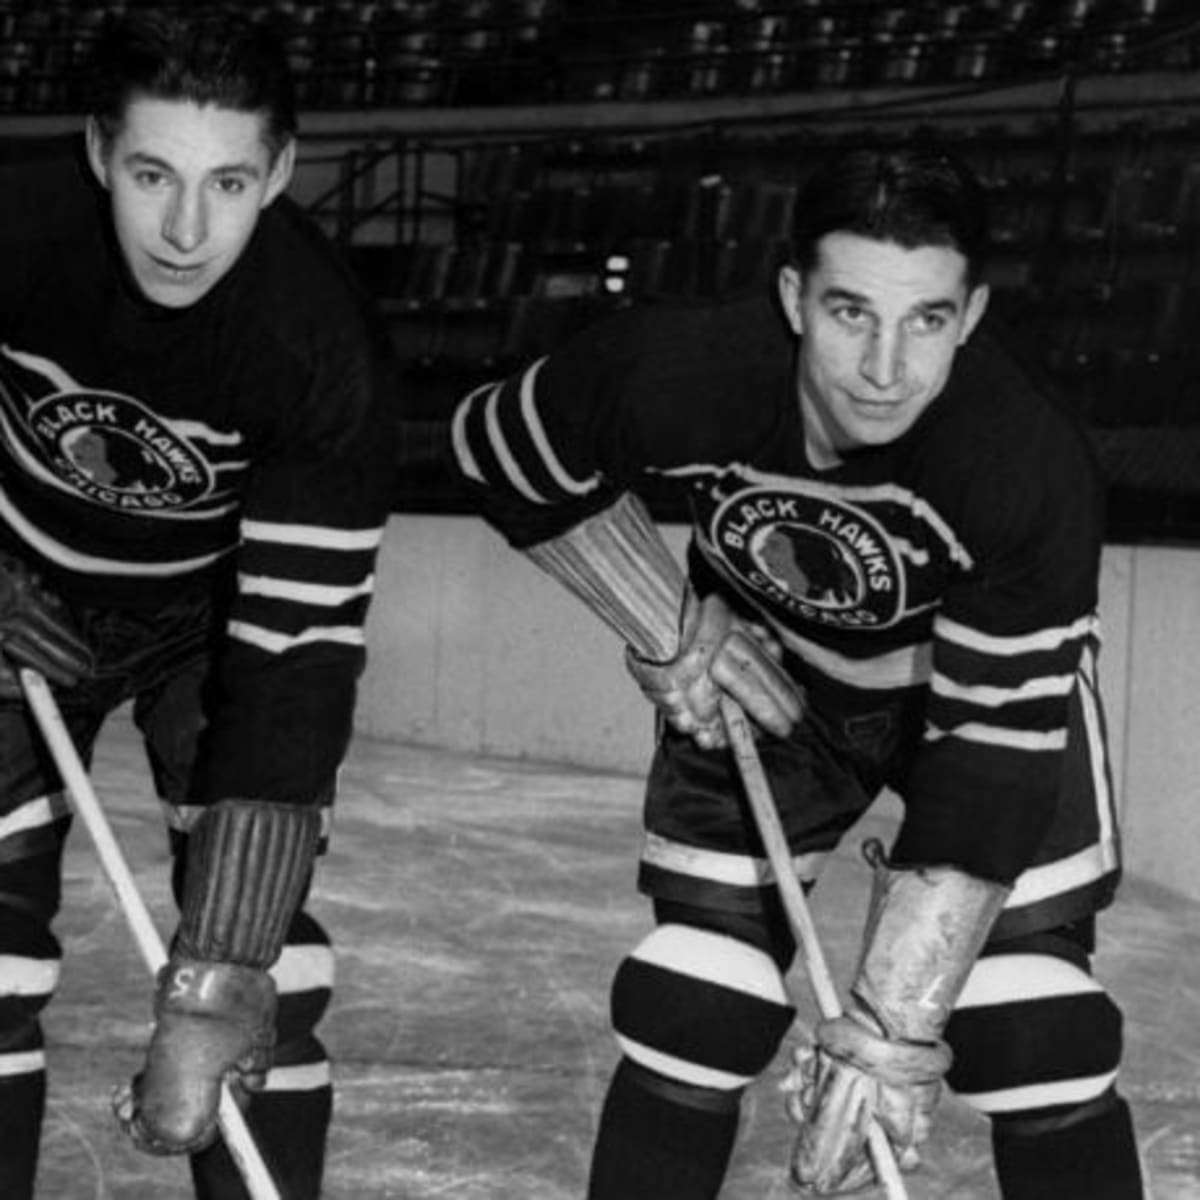 A new book tells of Hall of Fame hockey player Bill Mosienko